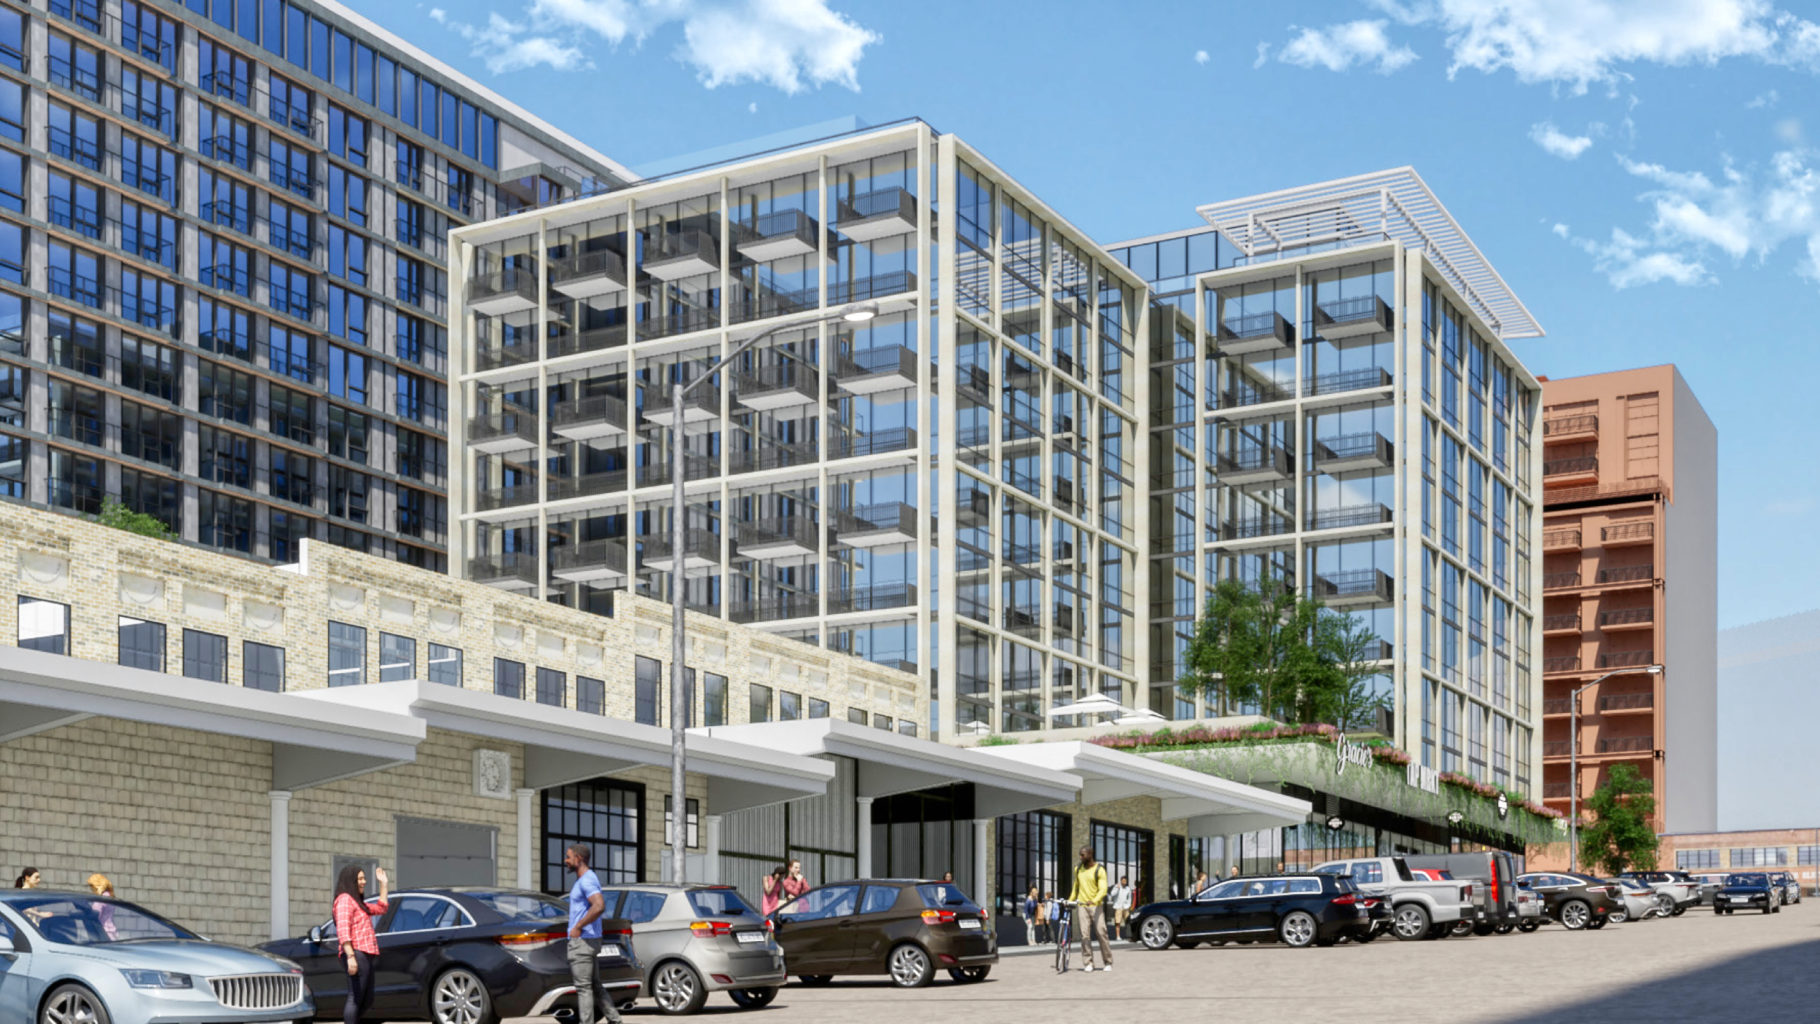 In the News: Washington Business Journal Features Union Market Project